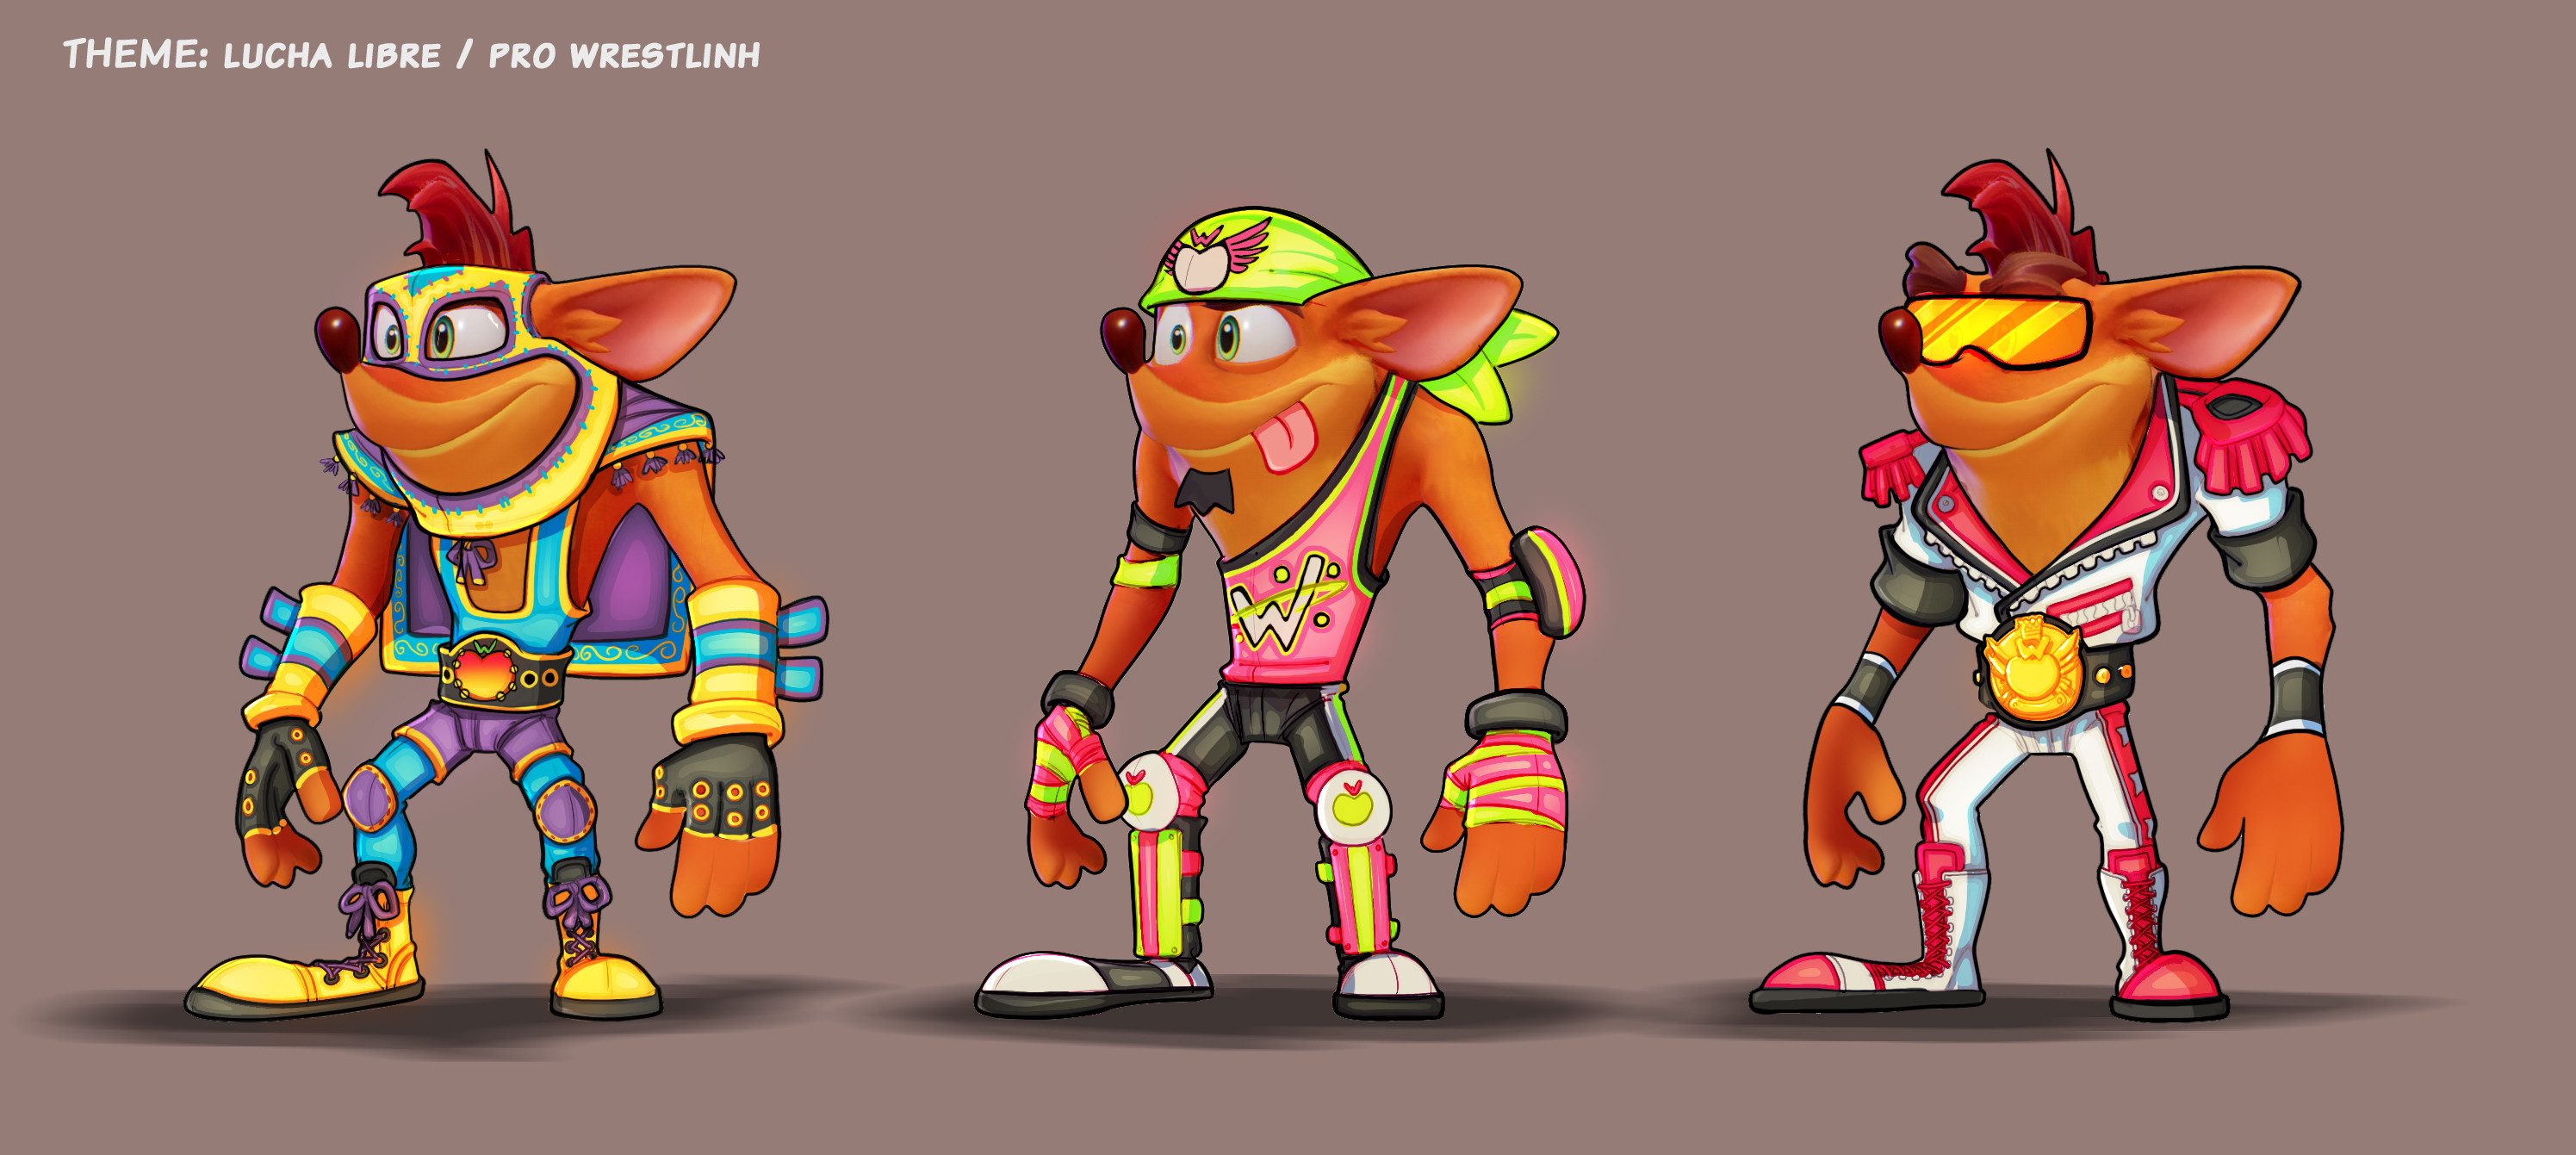 Pro wrestling Crash skin ideations. Tried mixing some of the greats if you know where to look :)